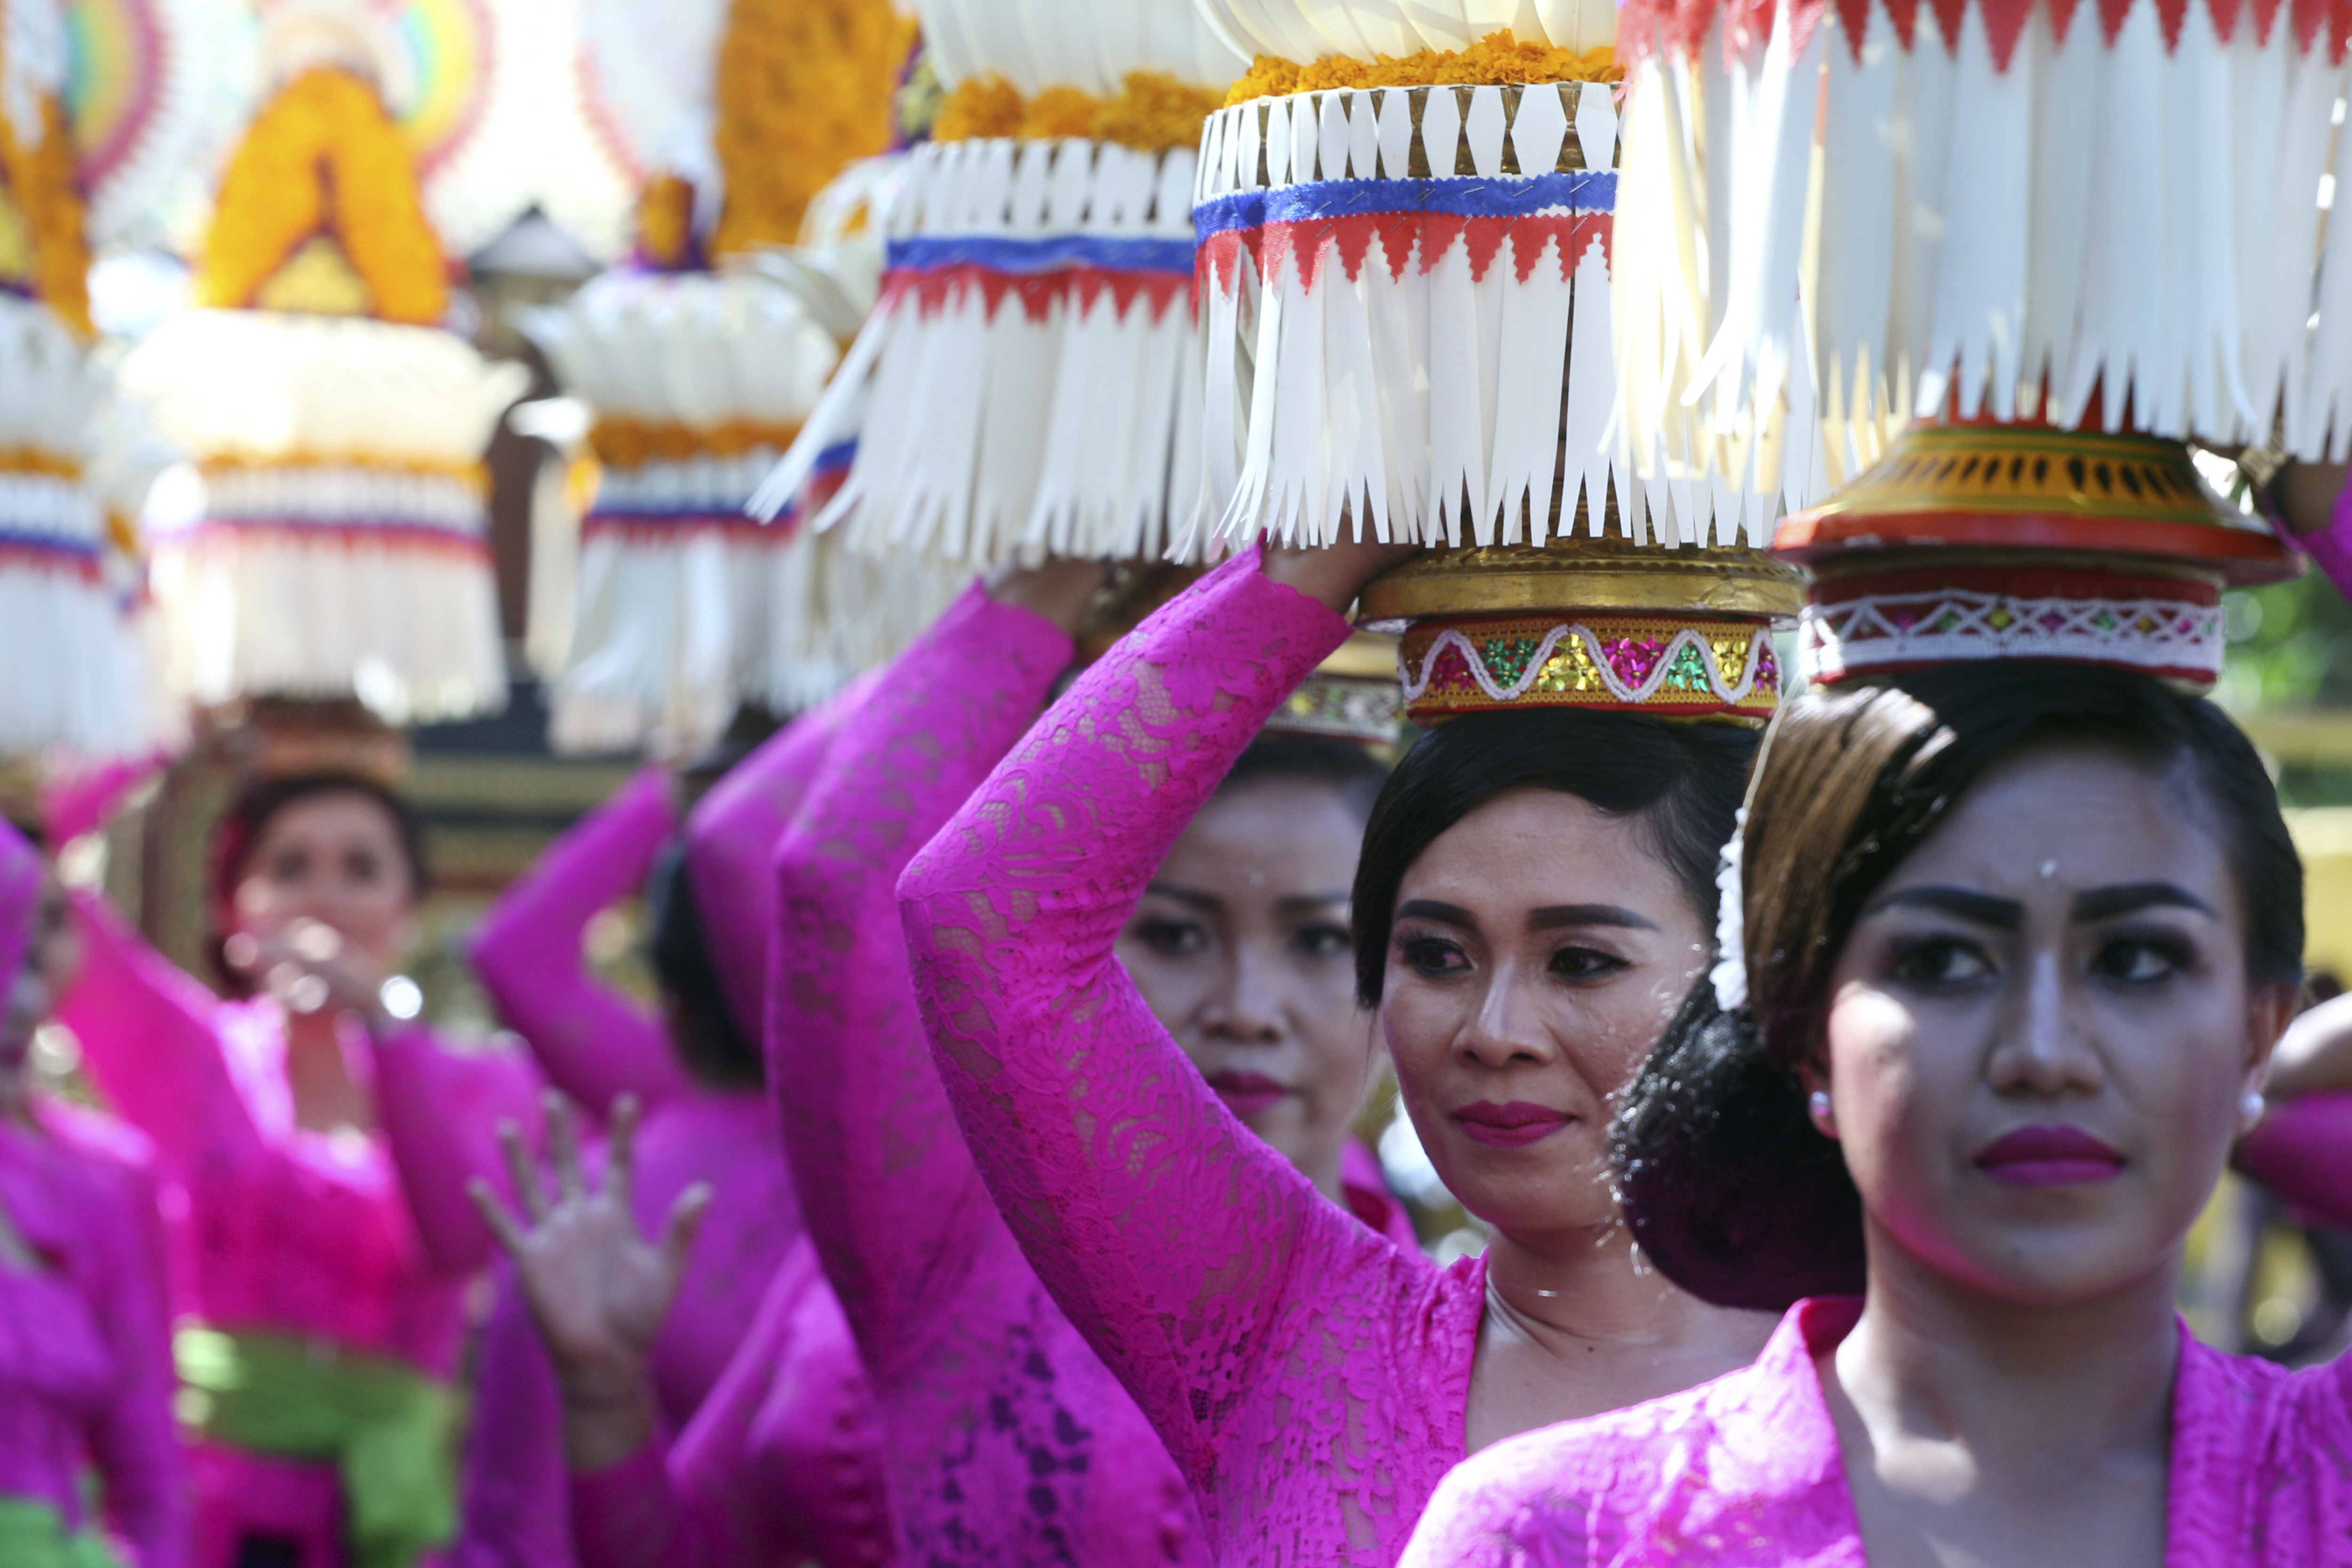 Balinese women in traditional dress line up during a parade of the Bali Arts Festival in Bali, Indonesia, Saturday, June 10, 2017. A month-long annual festival started on Saturday. (AP Photo/Firdia Lisnawati)